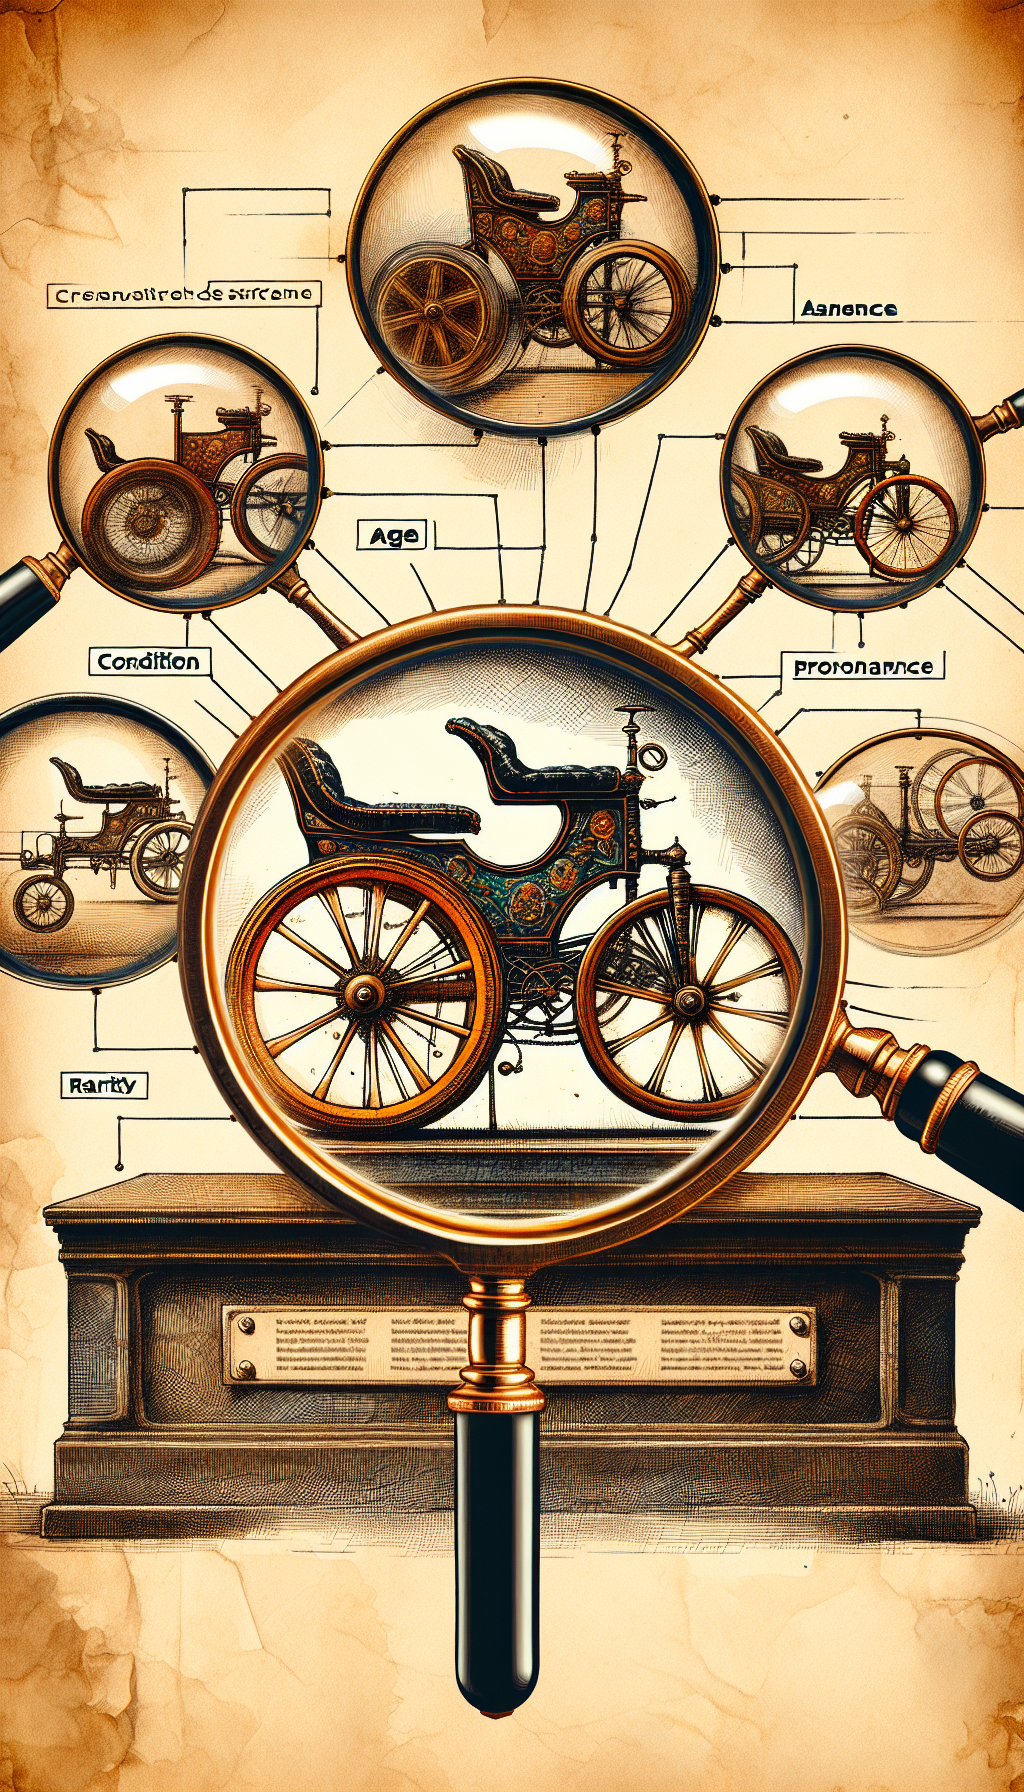 An illustration featuring an ornate antique tricycle presented on a pedestal, with magnifying glasses hovering over key aspects like the rustic frame, worn leather seat, and vintage wheels. Each magnifying glass reveals a golden glow, with text labels indicating "Age", "Condition", "Provenance", and "Rarity", symbolizing the factors that appraise the tricycle's value. The style transitions from sketchy outlines to vivid watercolors.